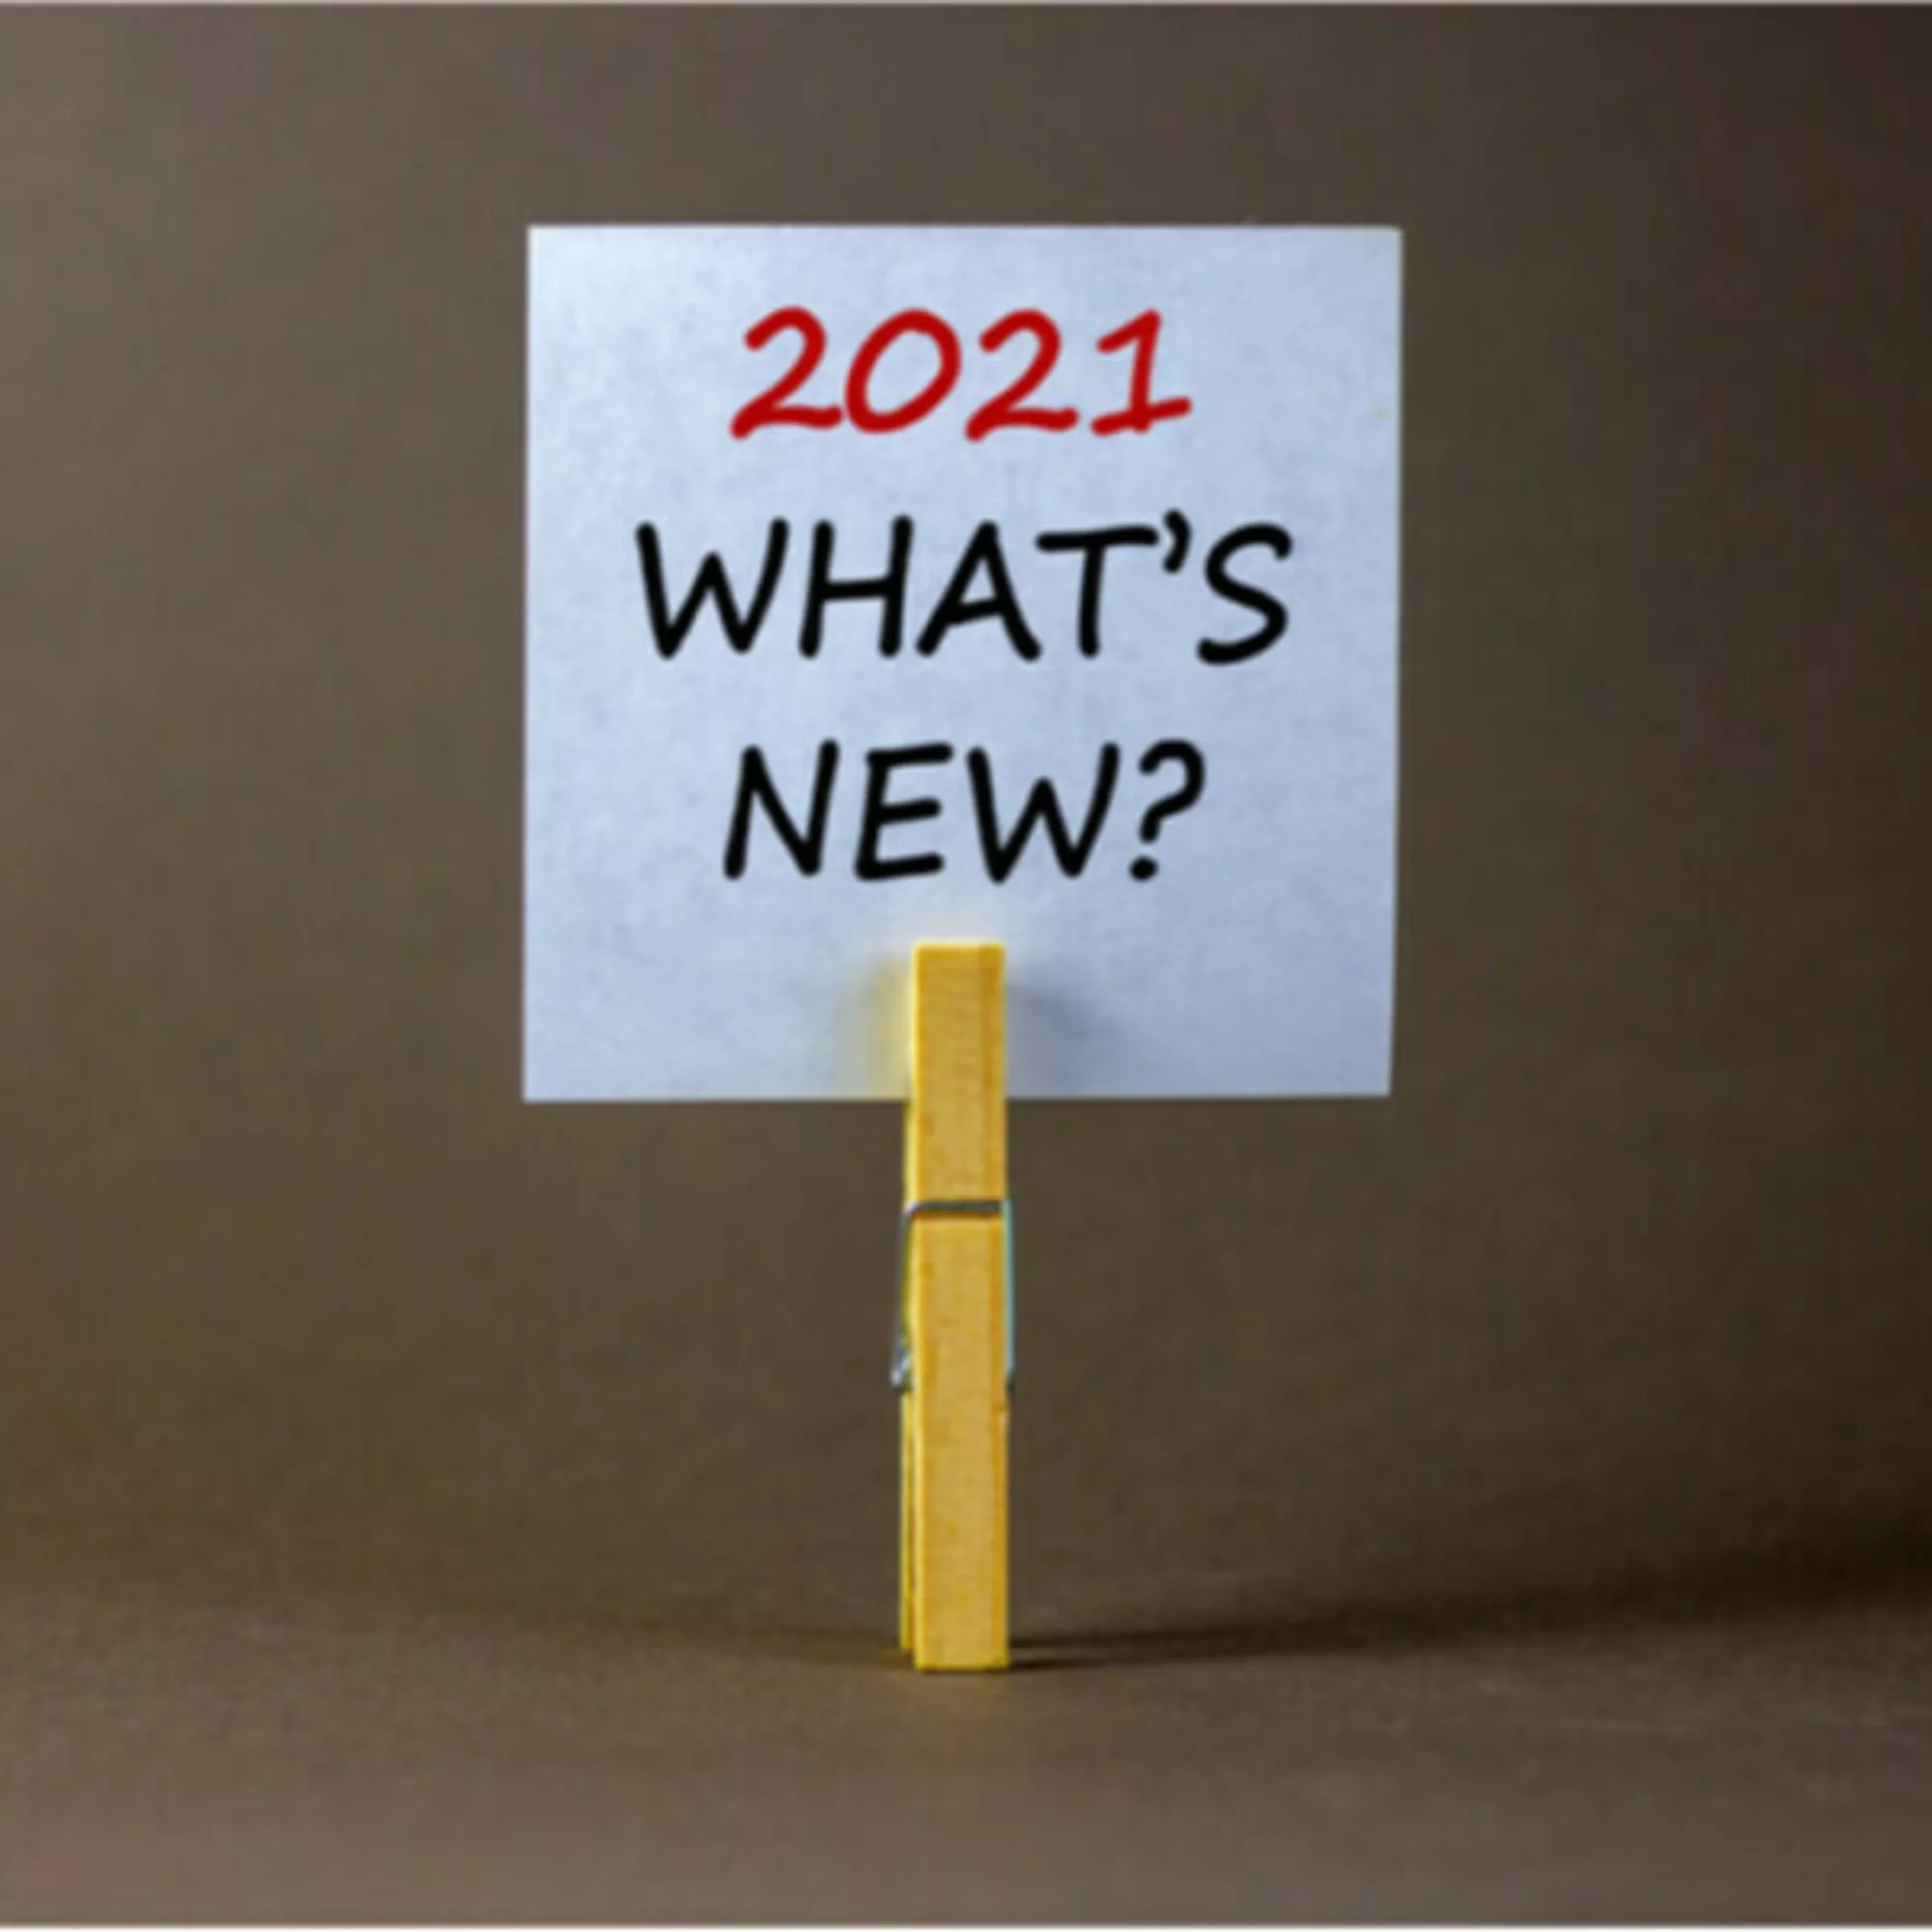 Small paper sign that says "2021 WHAT's NEW?"